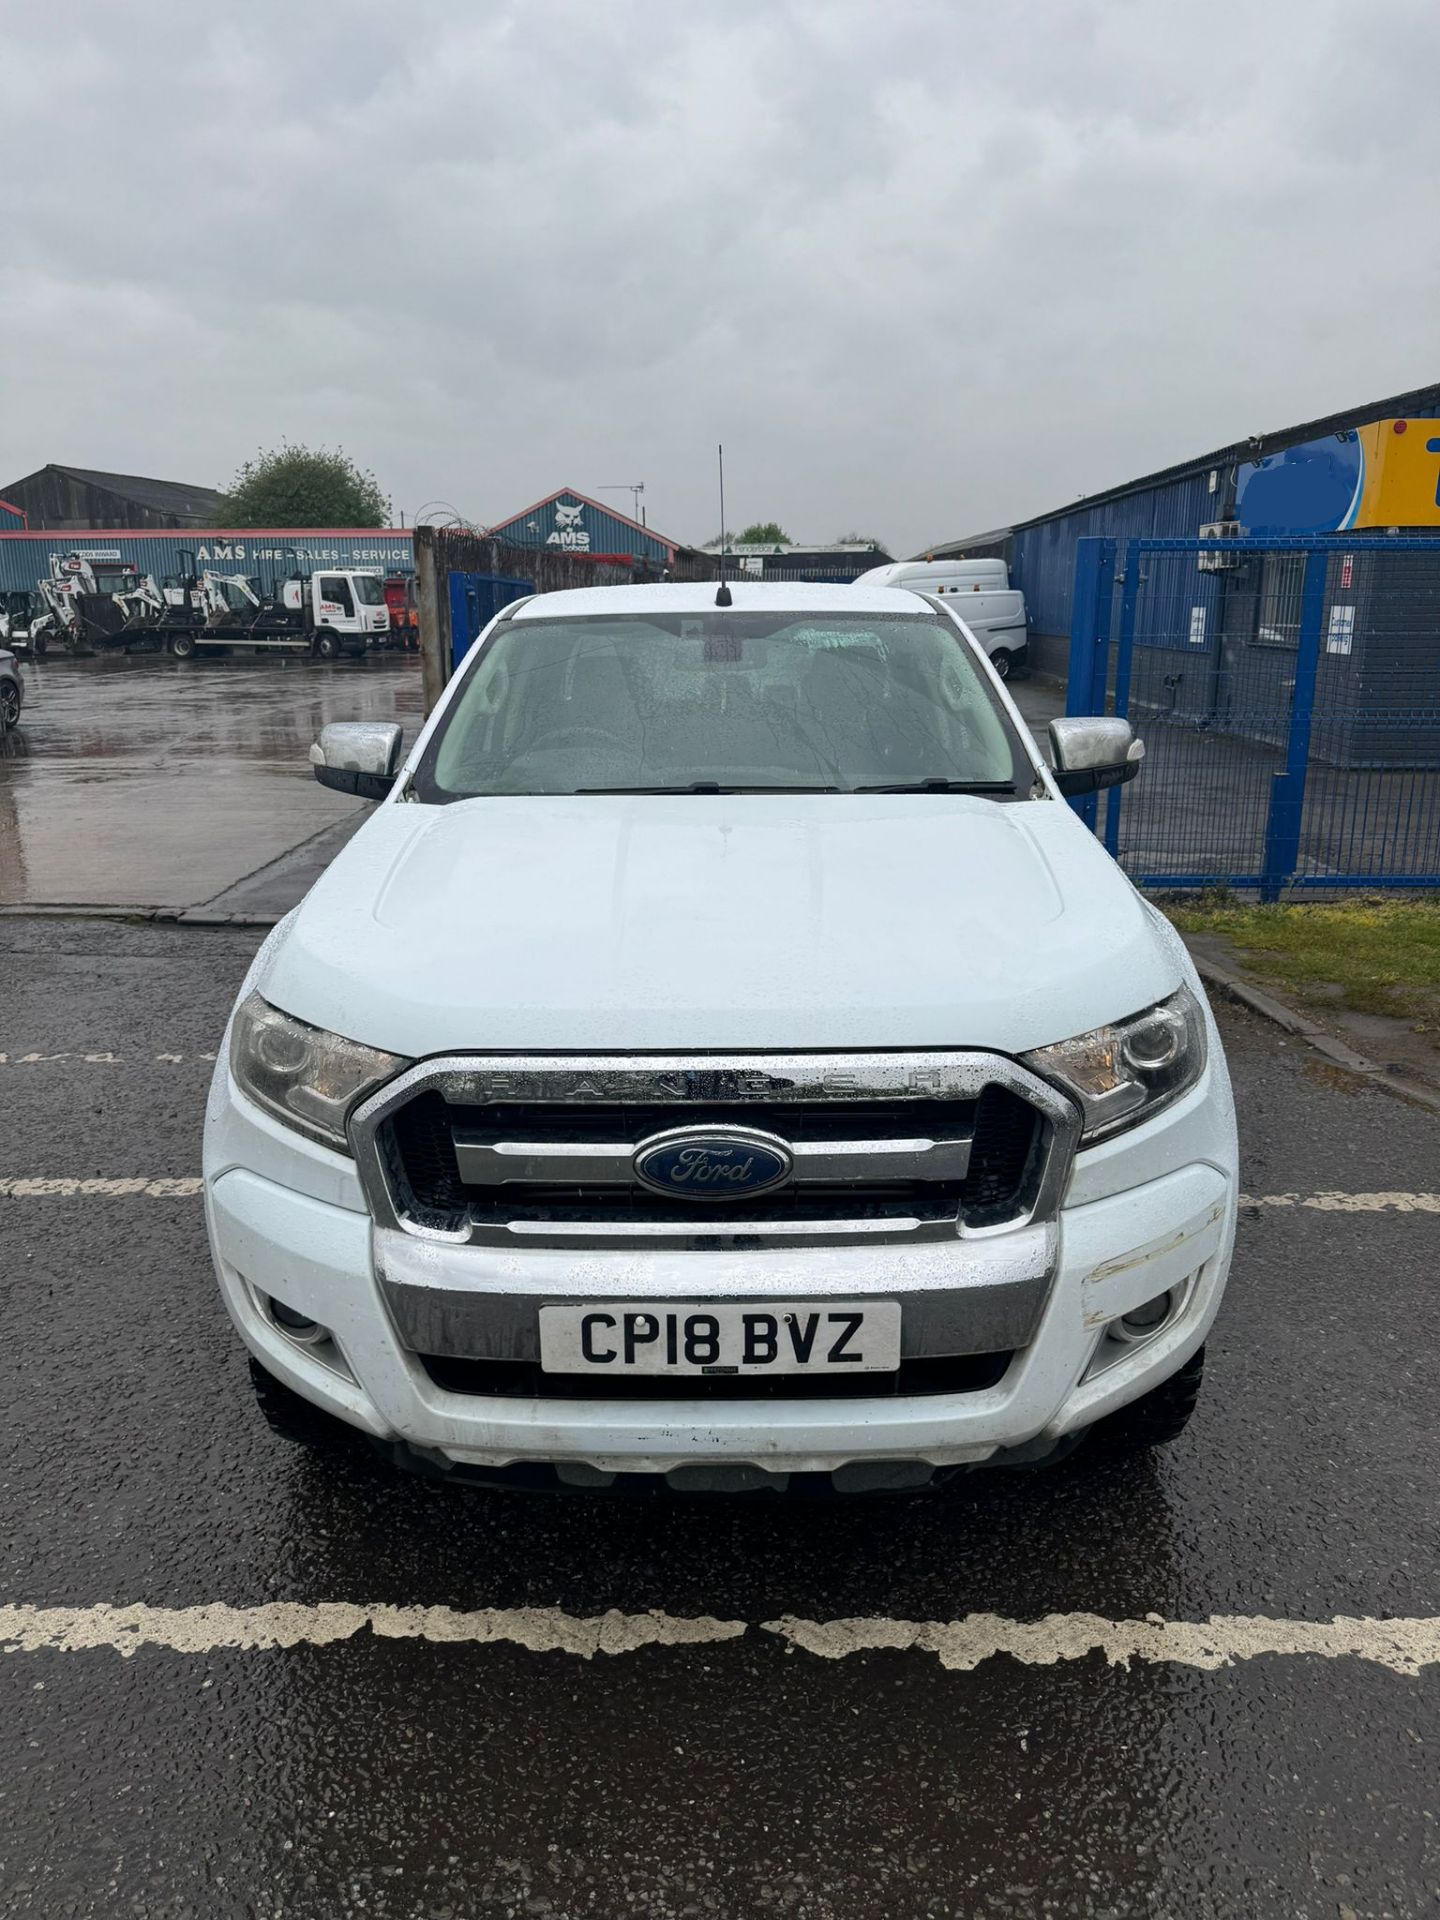 2018 18 FORD RANGER LIMITED PICK - 133K MILES - LEATHER SEATS - ALLOY WHEELS WITH BF GOODRICH TYRES - Image 2 of 12